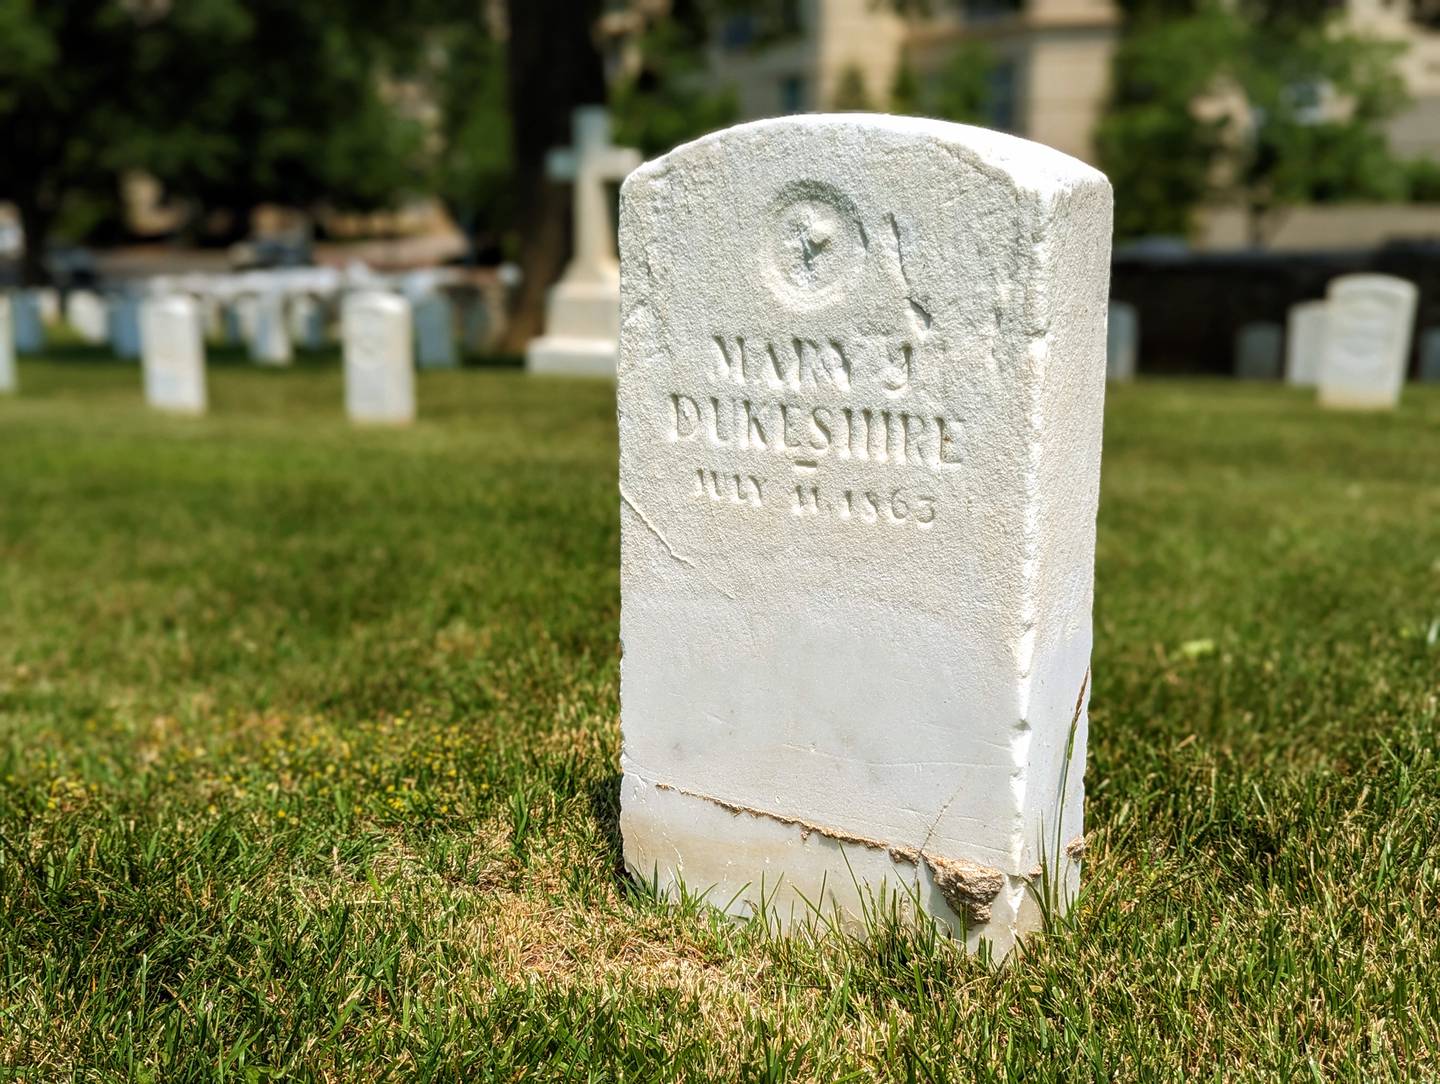 Mary J. Dukeshire's headstone in the Annapolis National Cemetery is the only one for the four Civil War nurses buried there that includes a date.